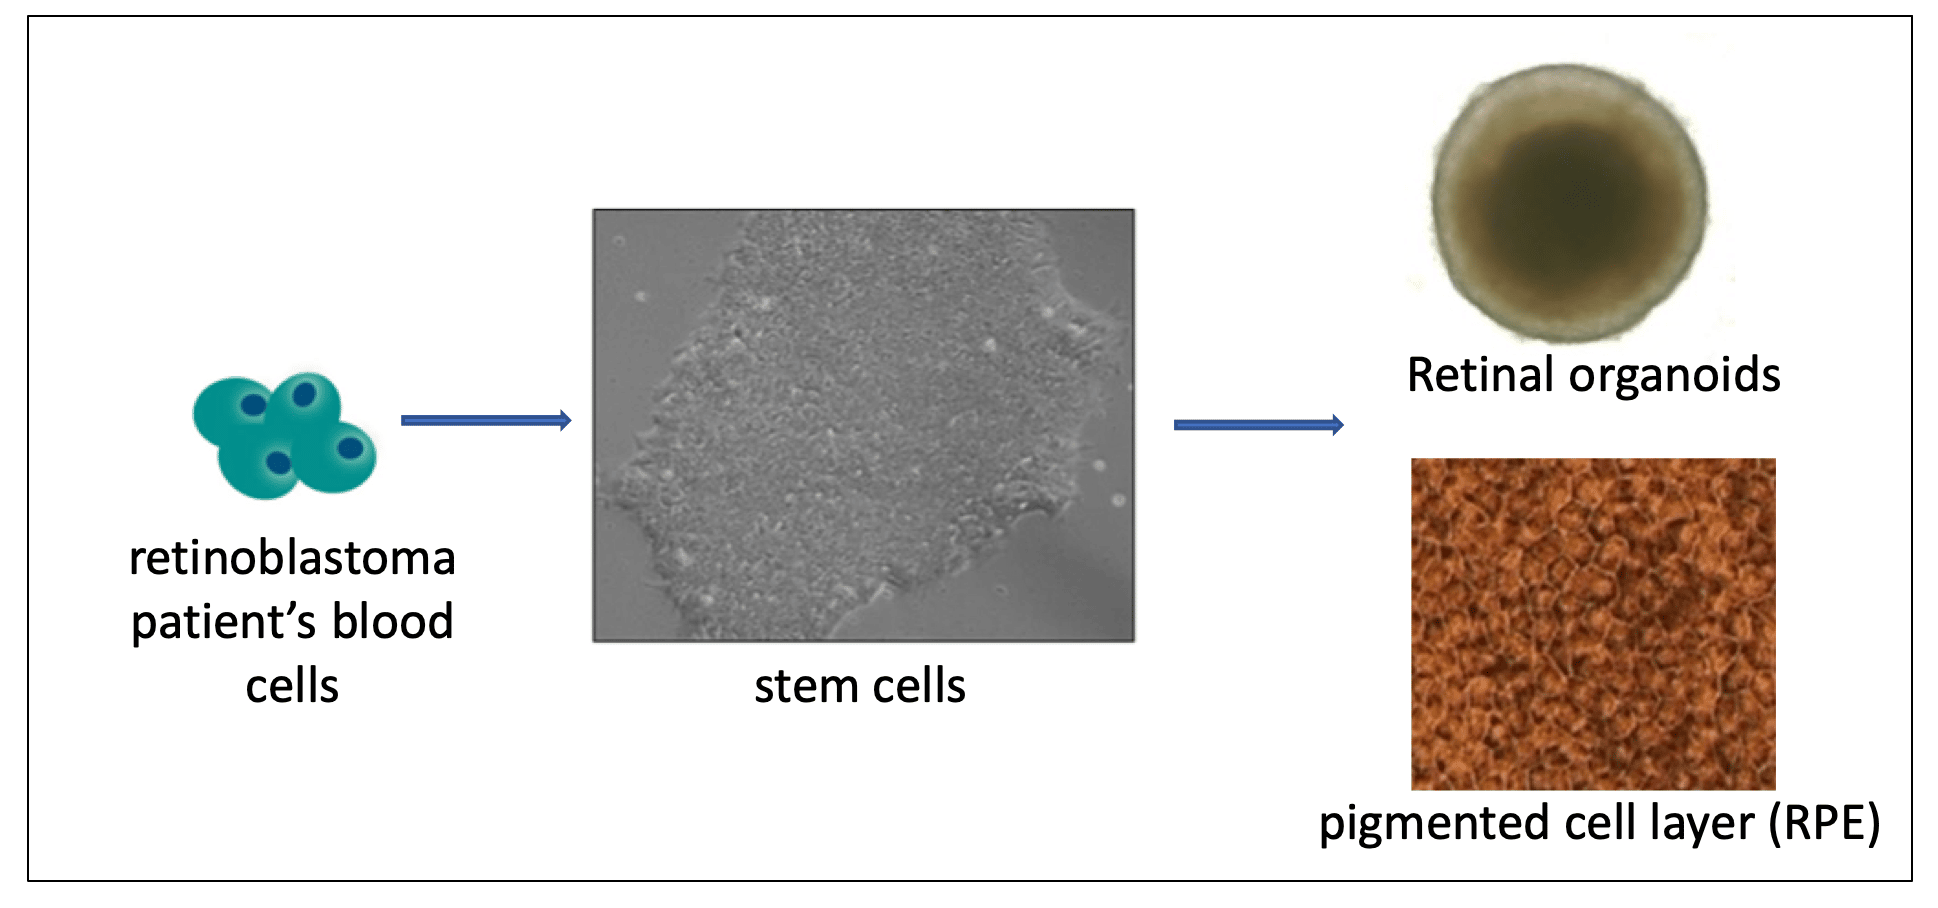 The graph shows a retinoblastoma patient's blood cells, then stem cells, then retinal organoids and pigmented cell layer (RPE)